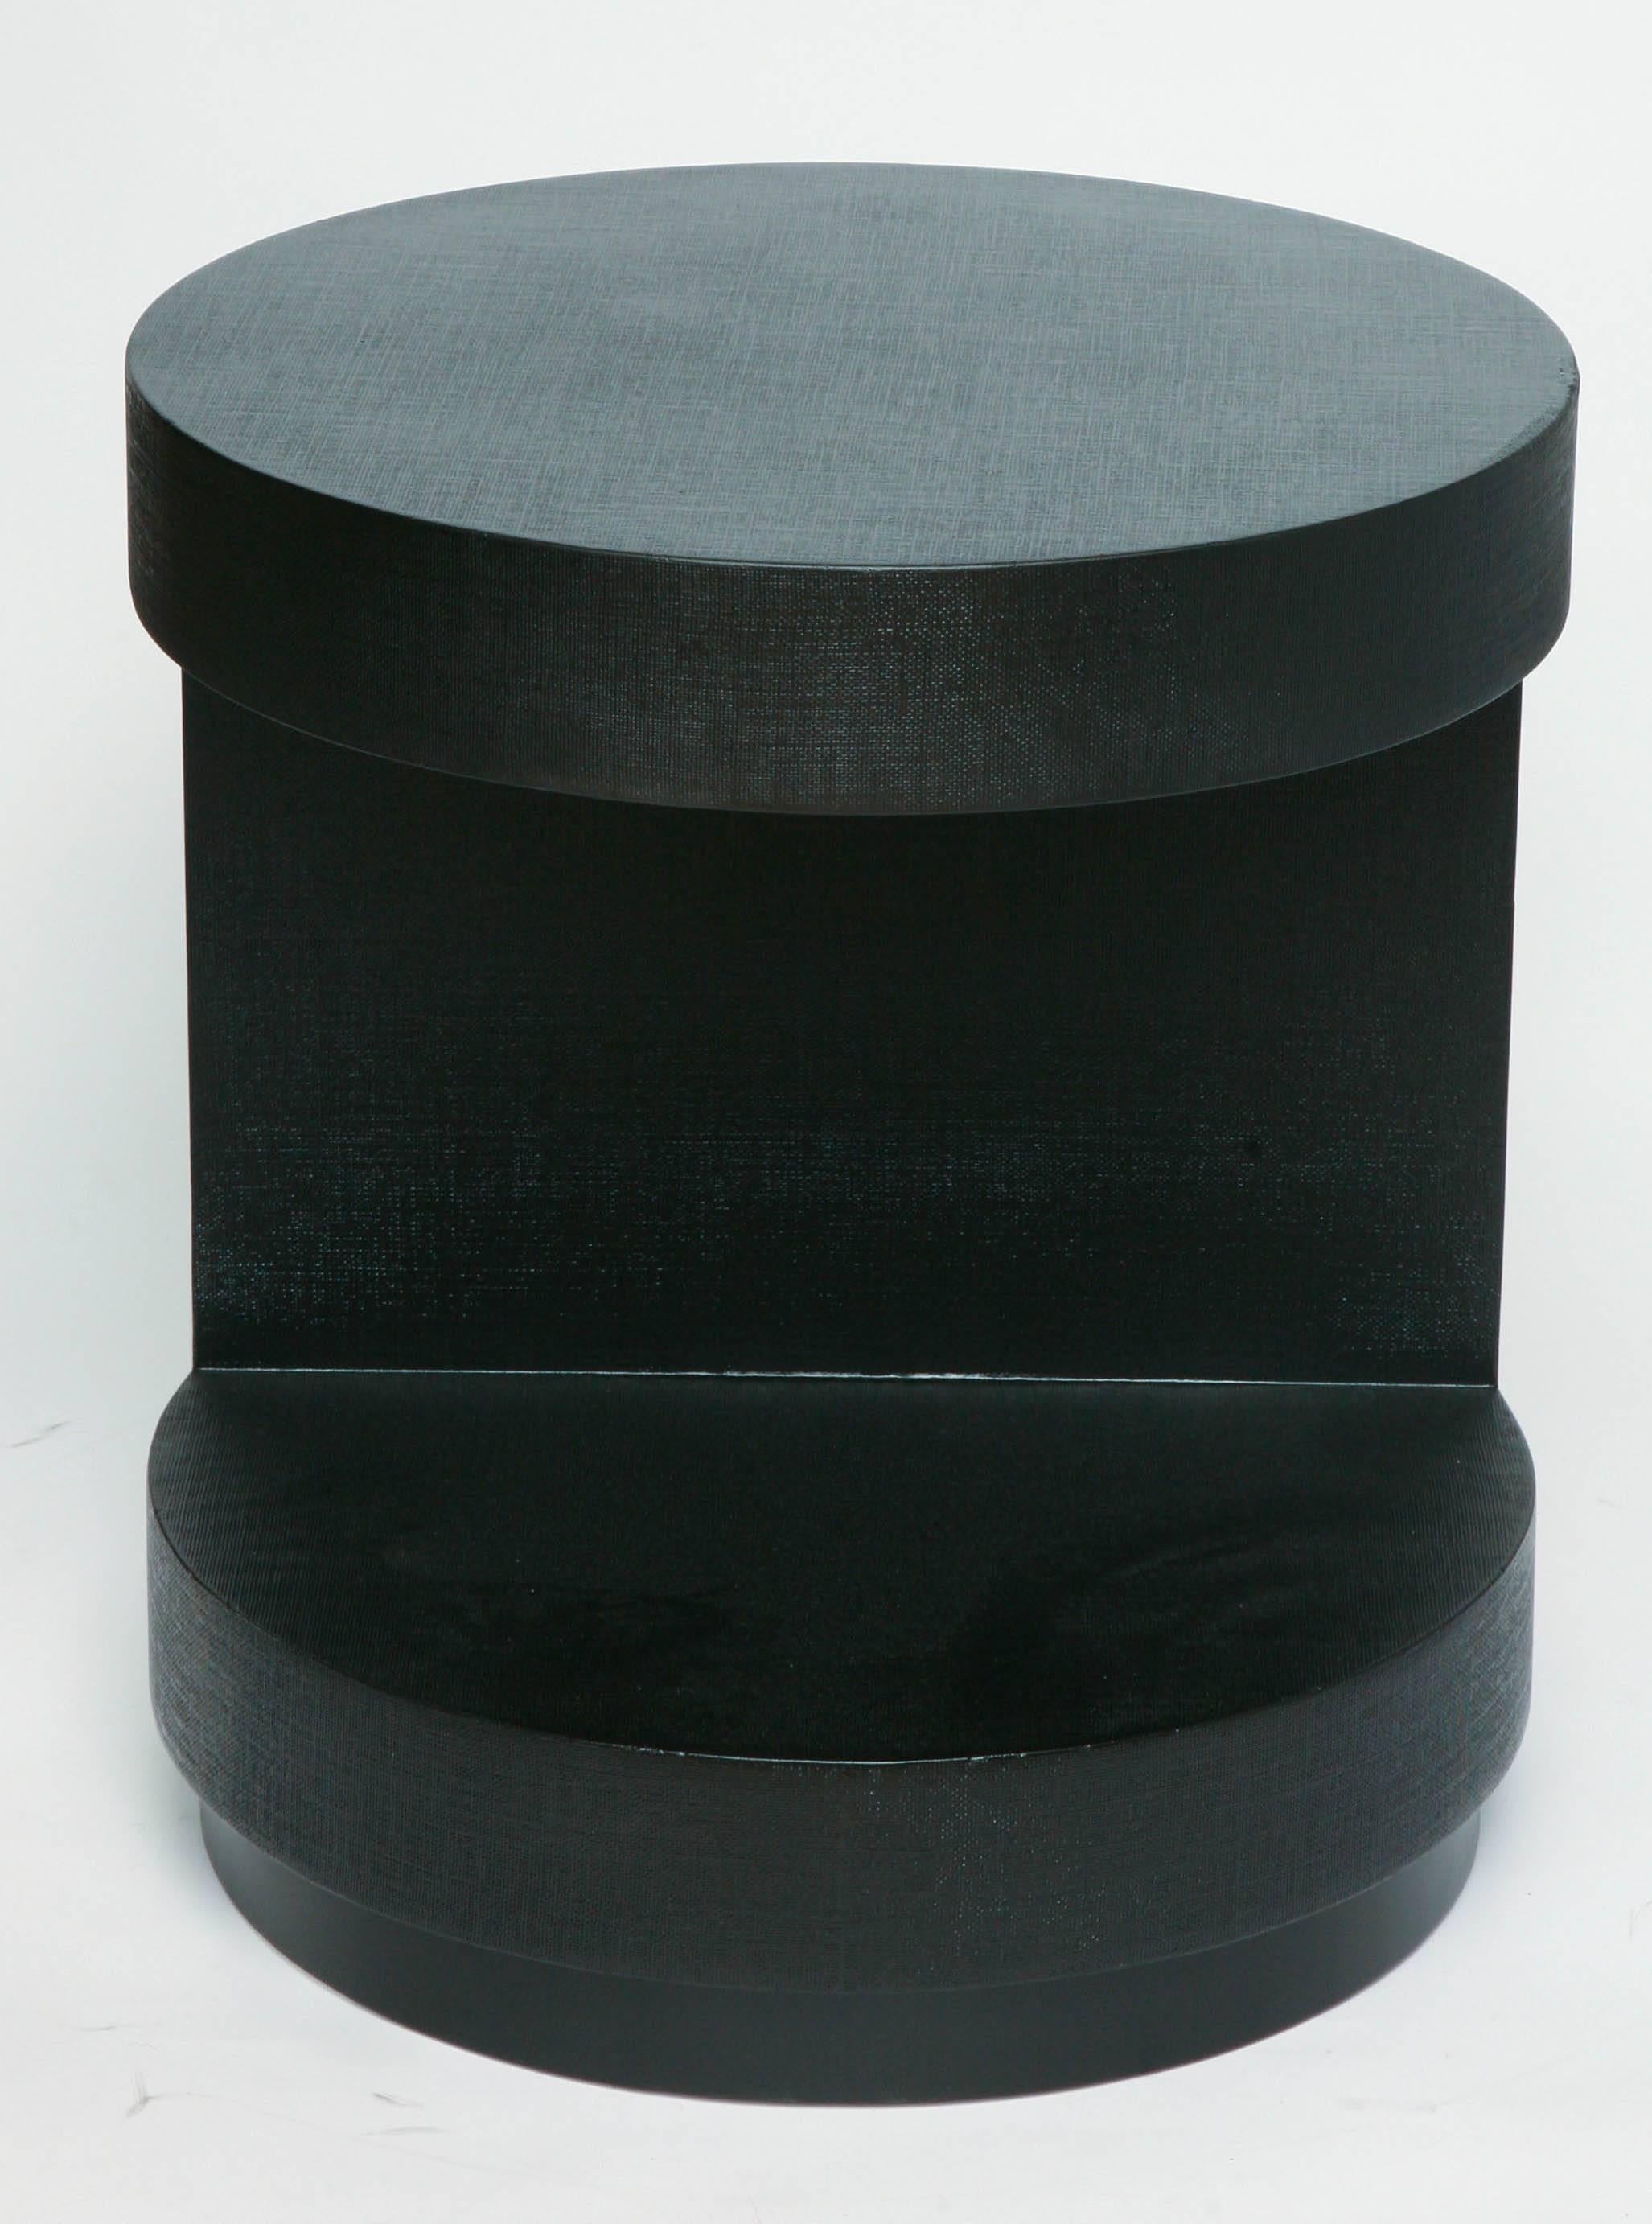 Raffia covered black lacquered two-tiered end table attributed to Karl Springer.